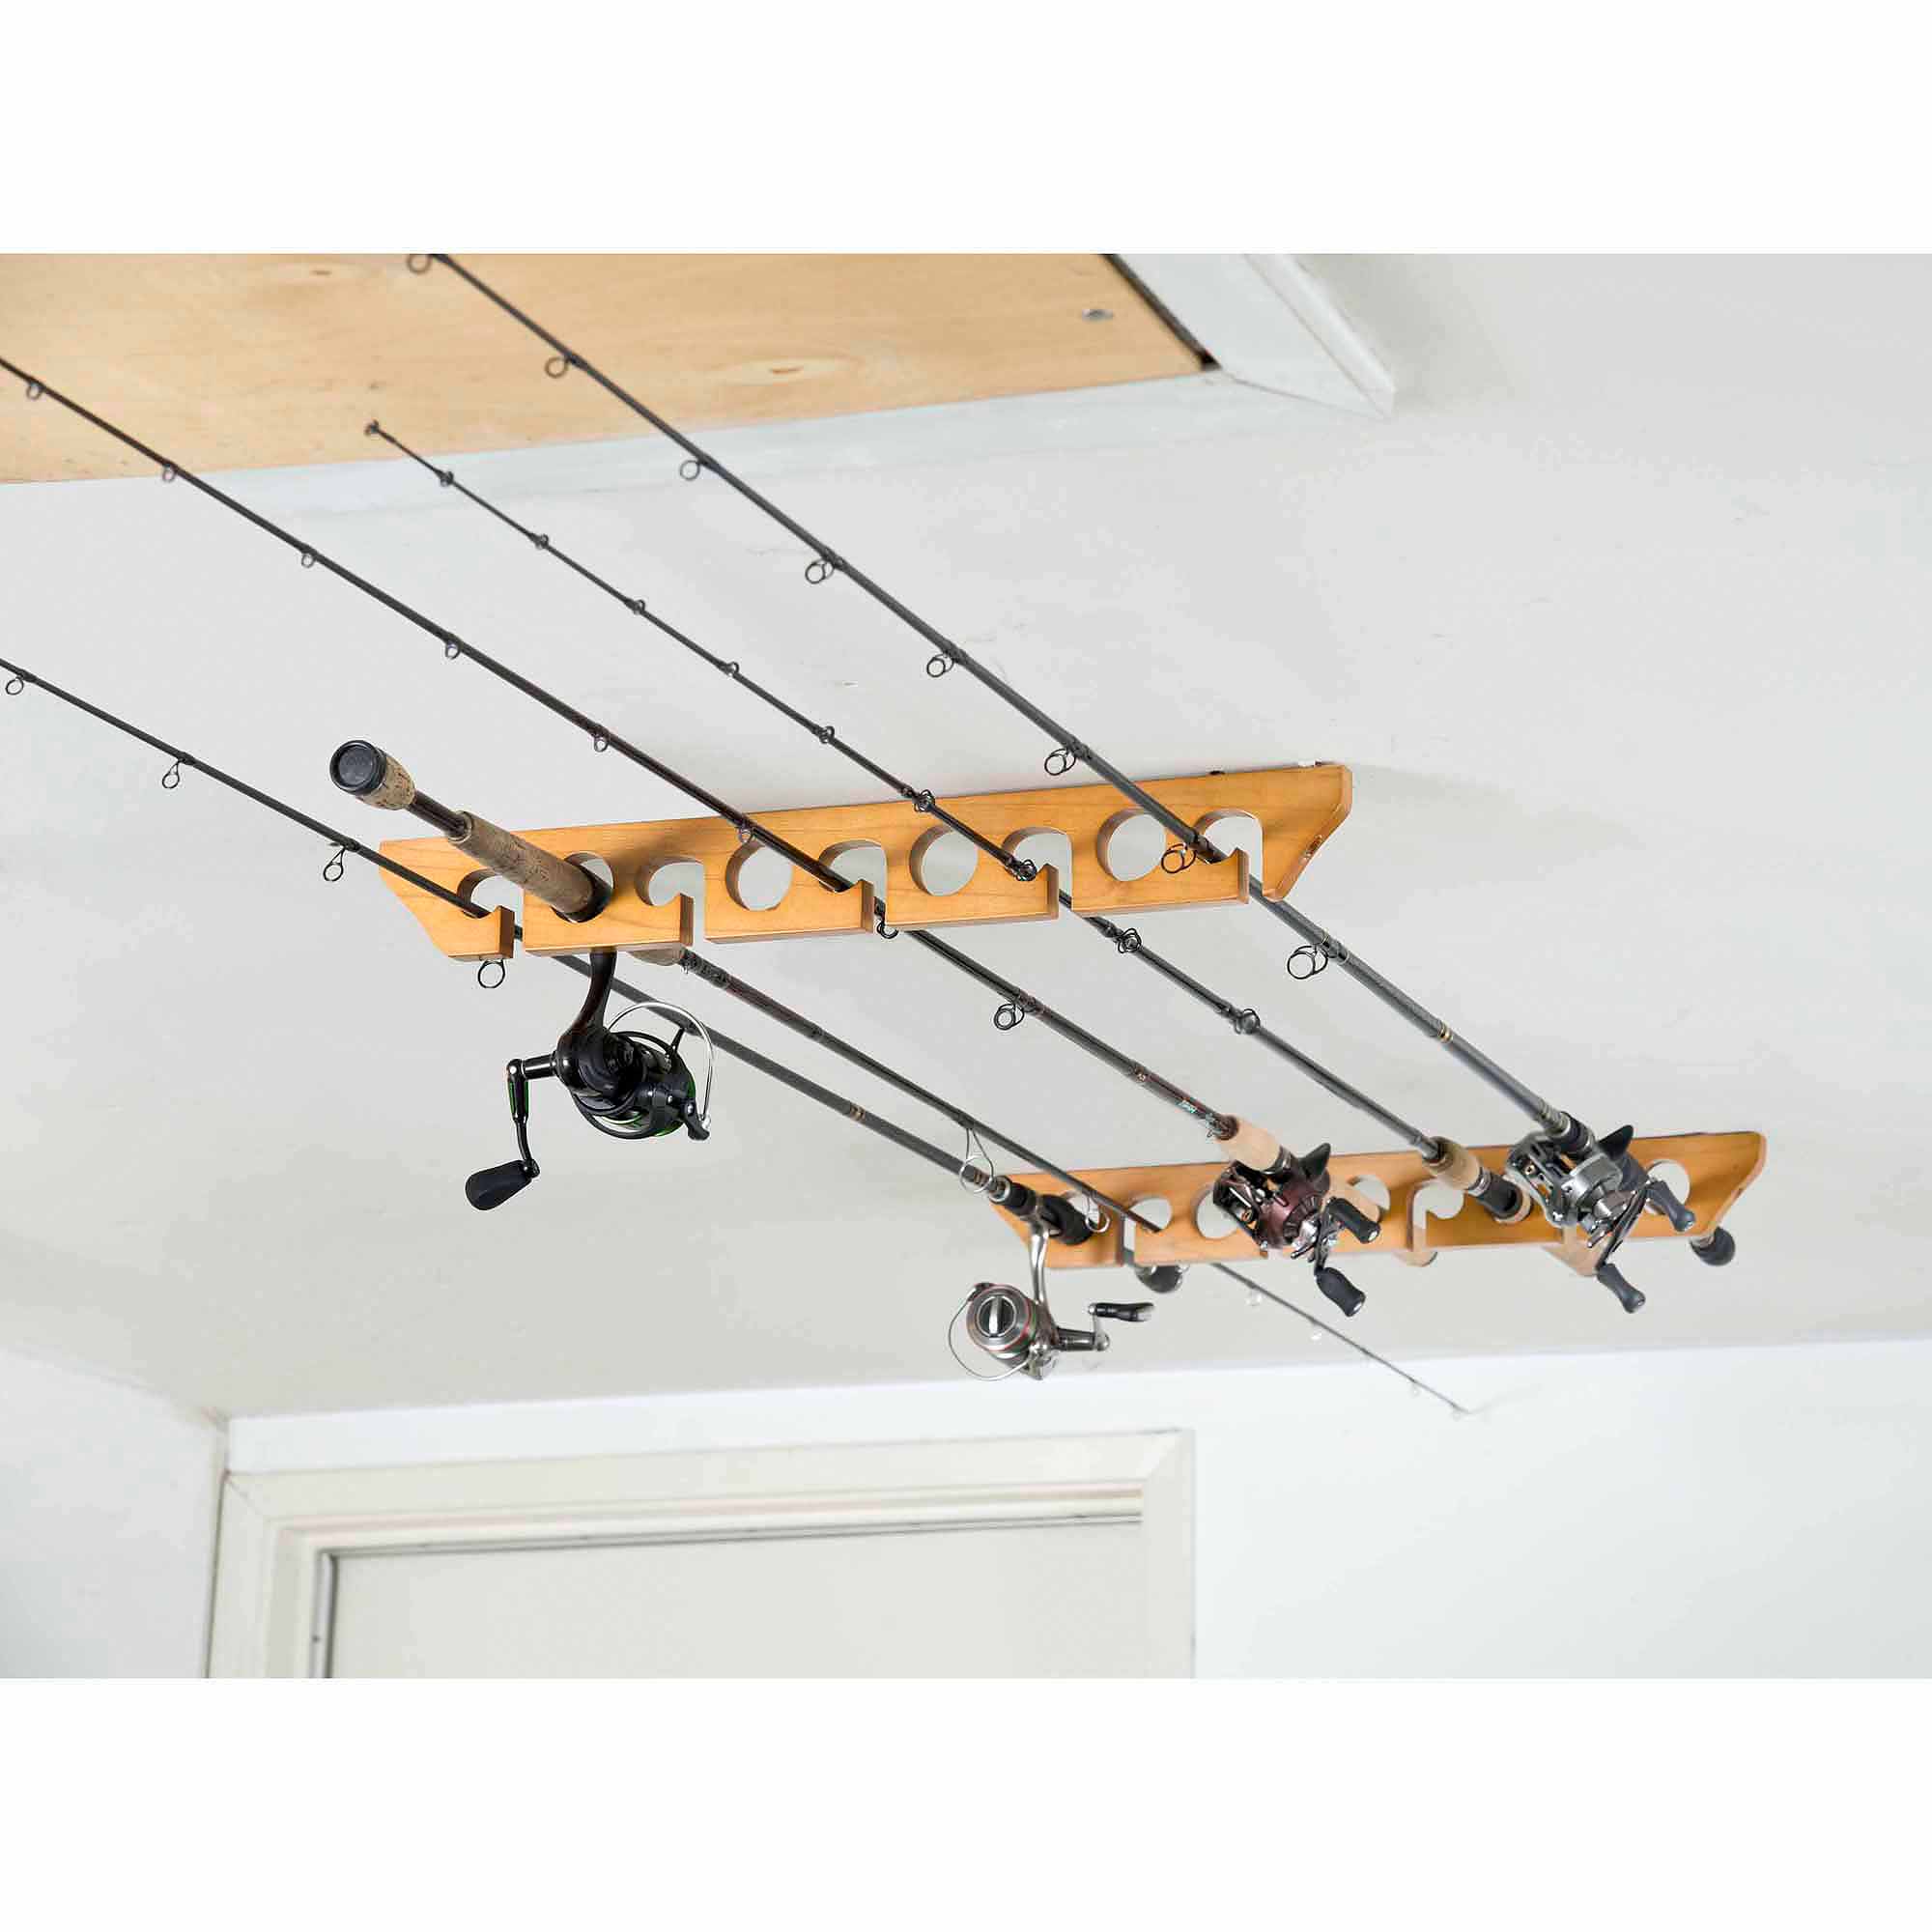 Old Cedar Outfitters Wooden Ceiling Horizontal Rod Rack, 9 Capacity - image 1 of 3